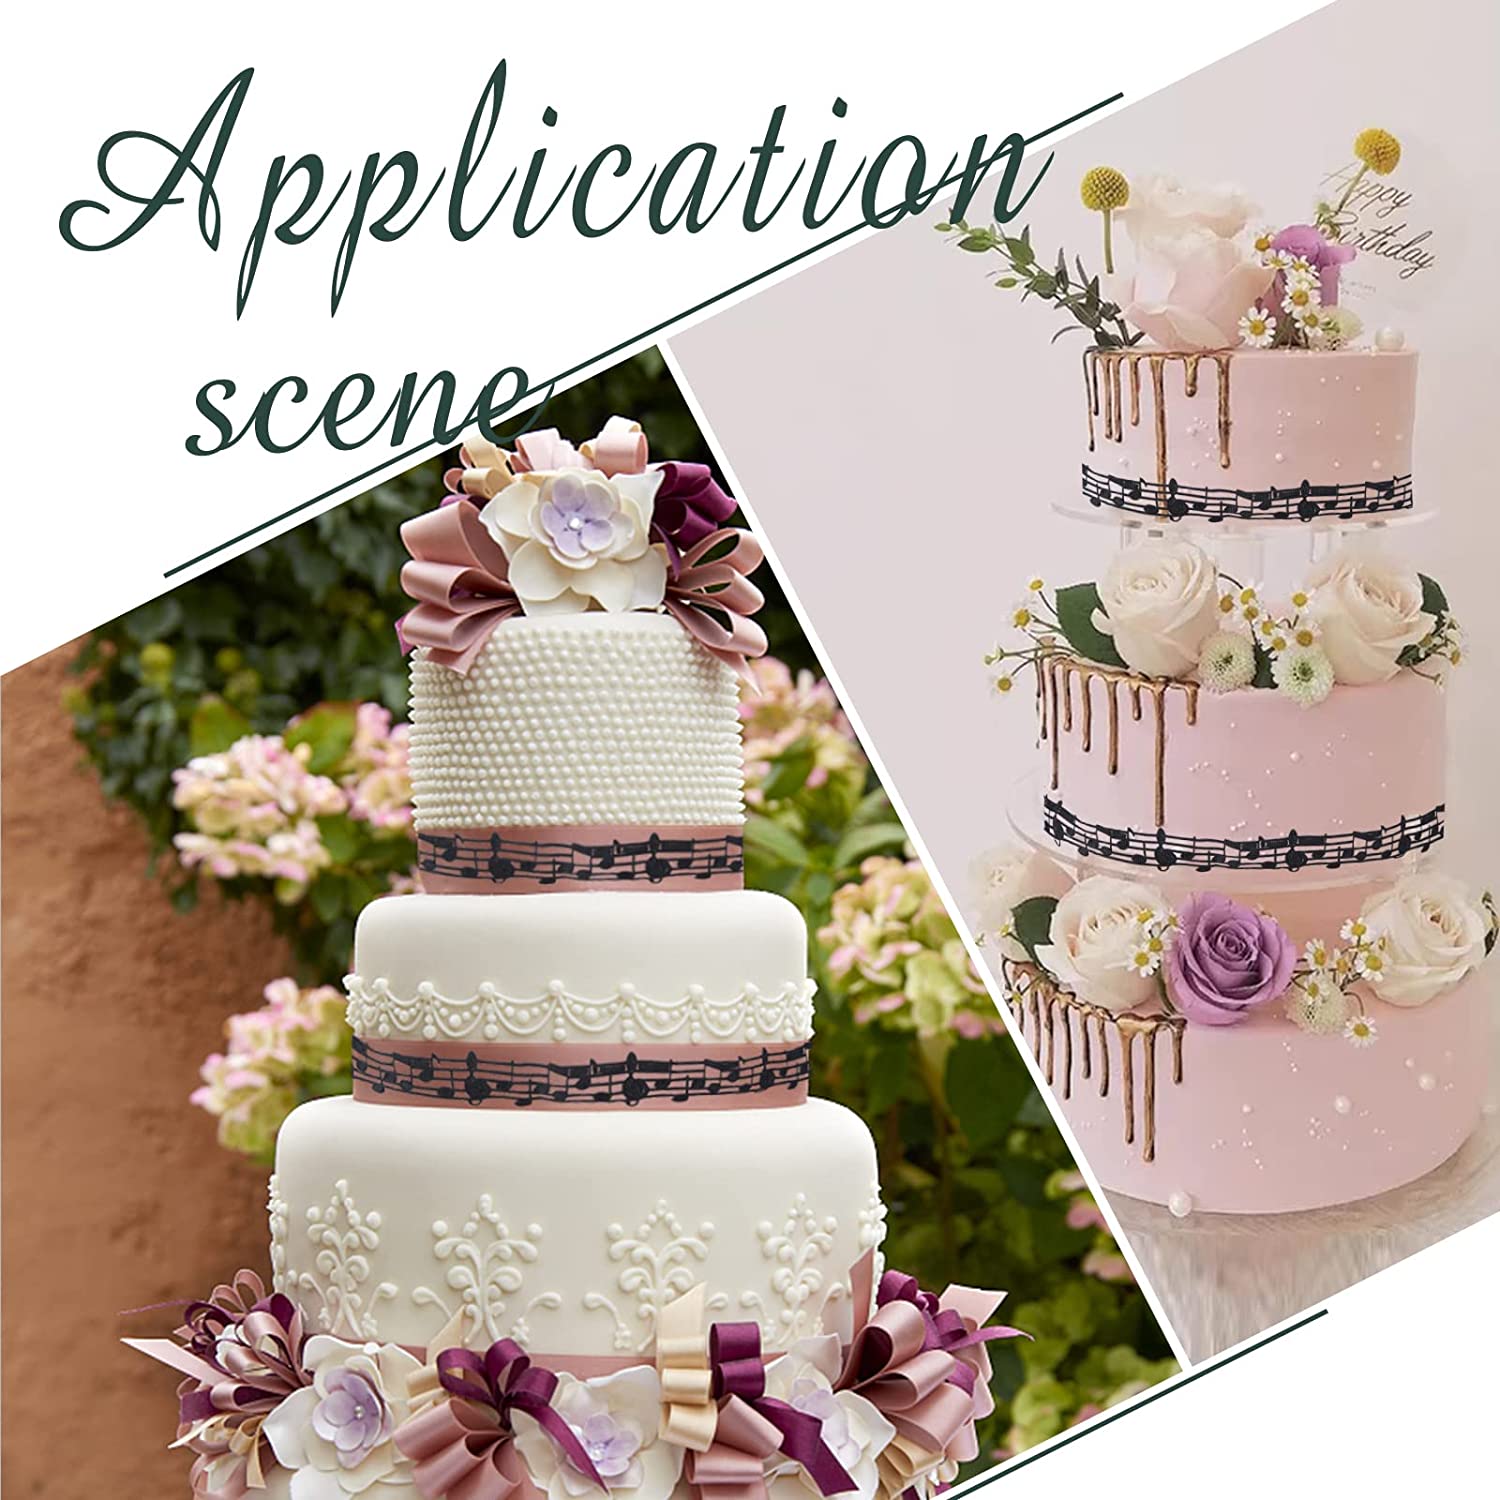 Cakes by Angie - Musical wedding cake. | Facebook